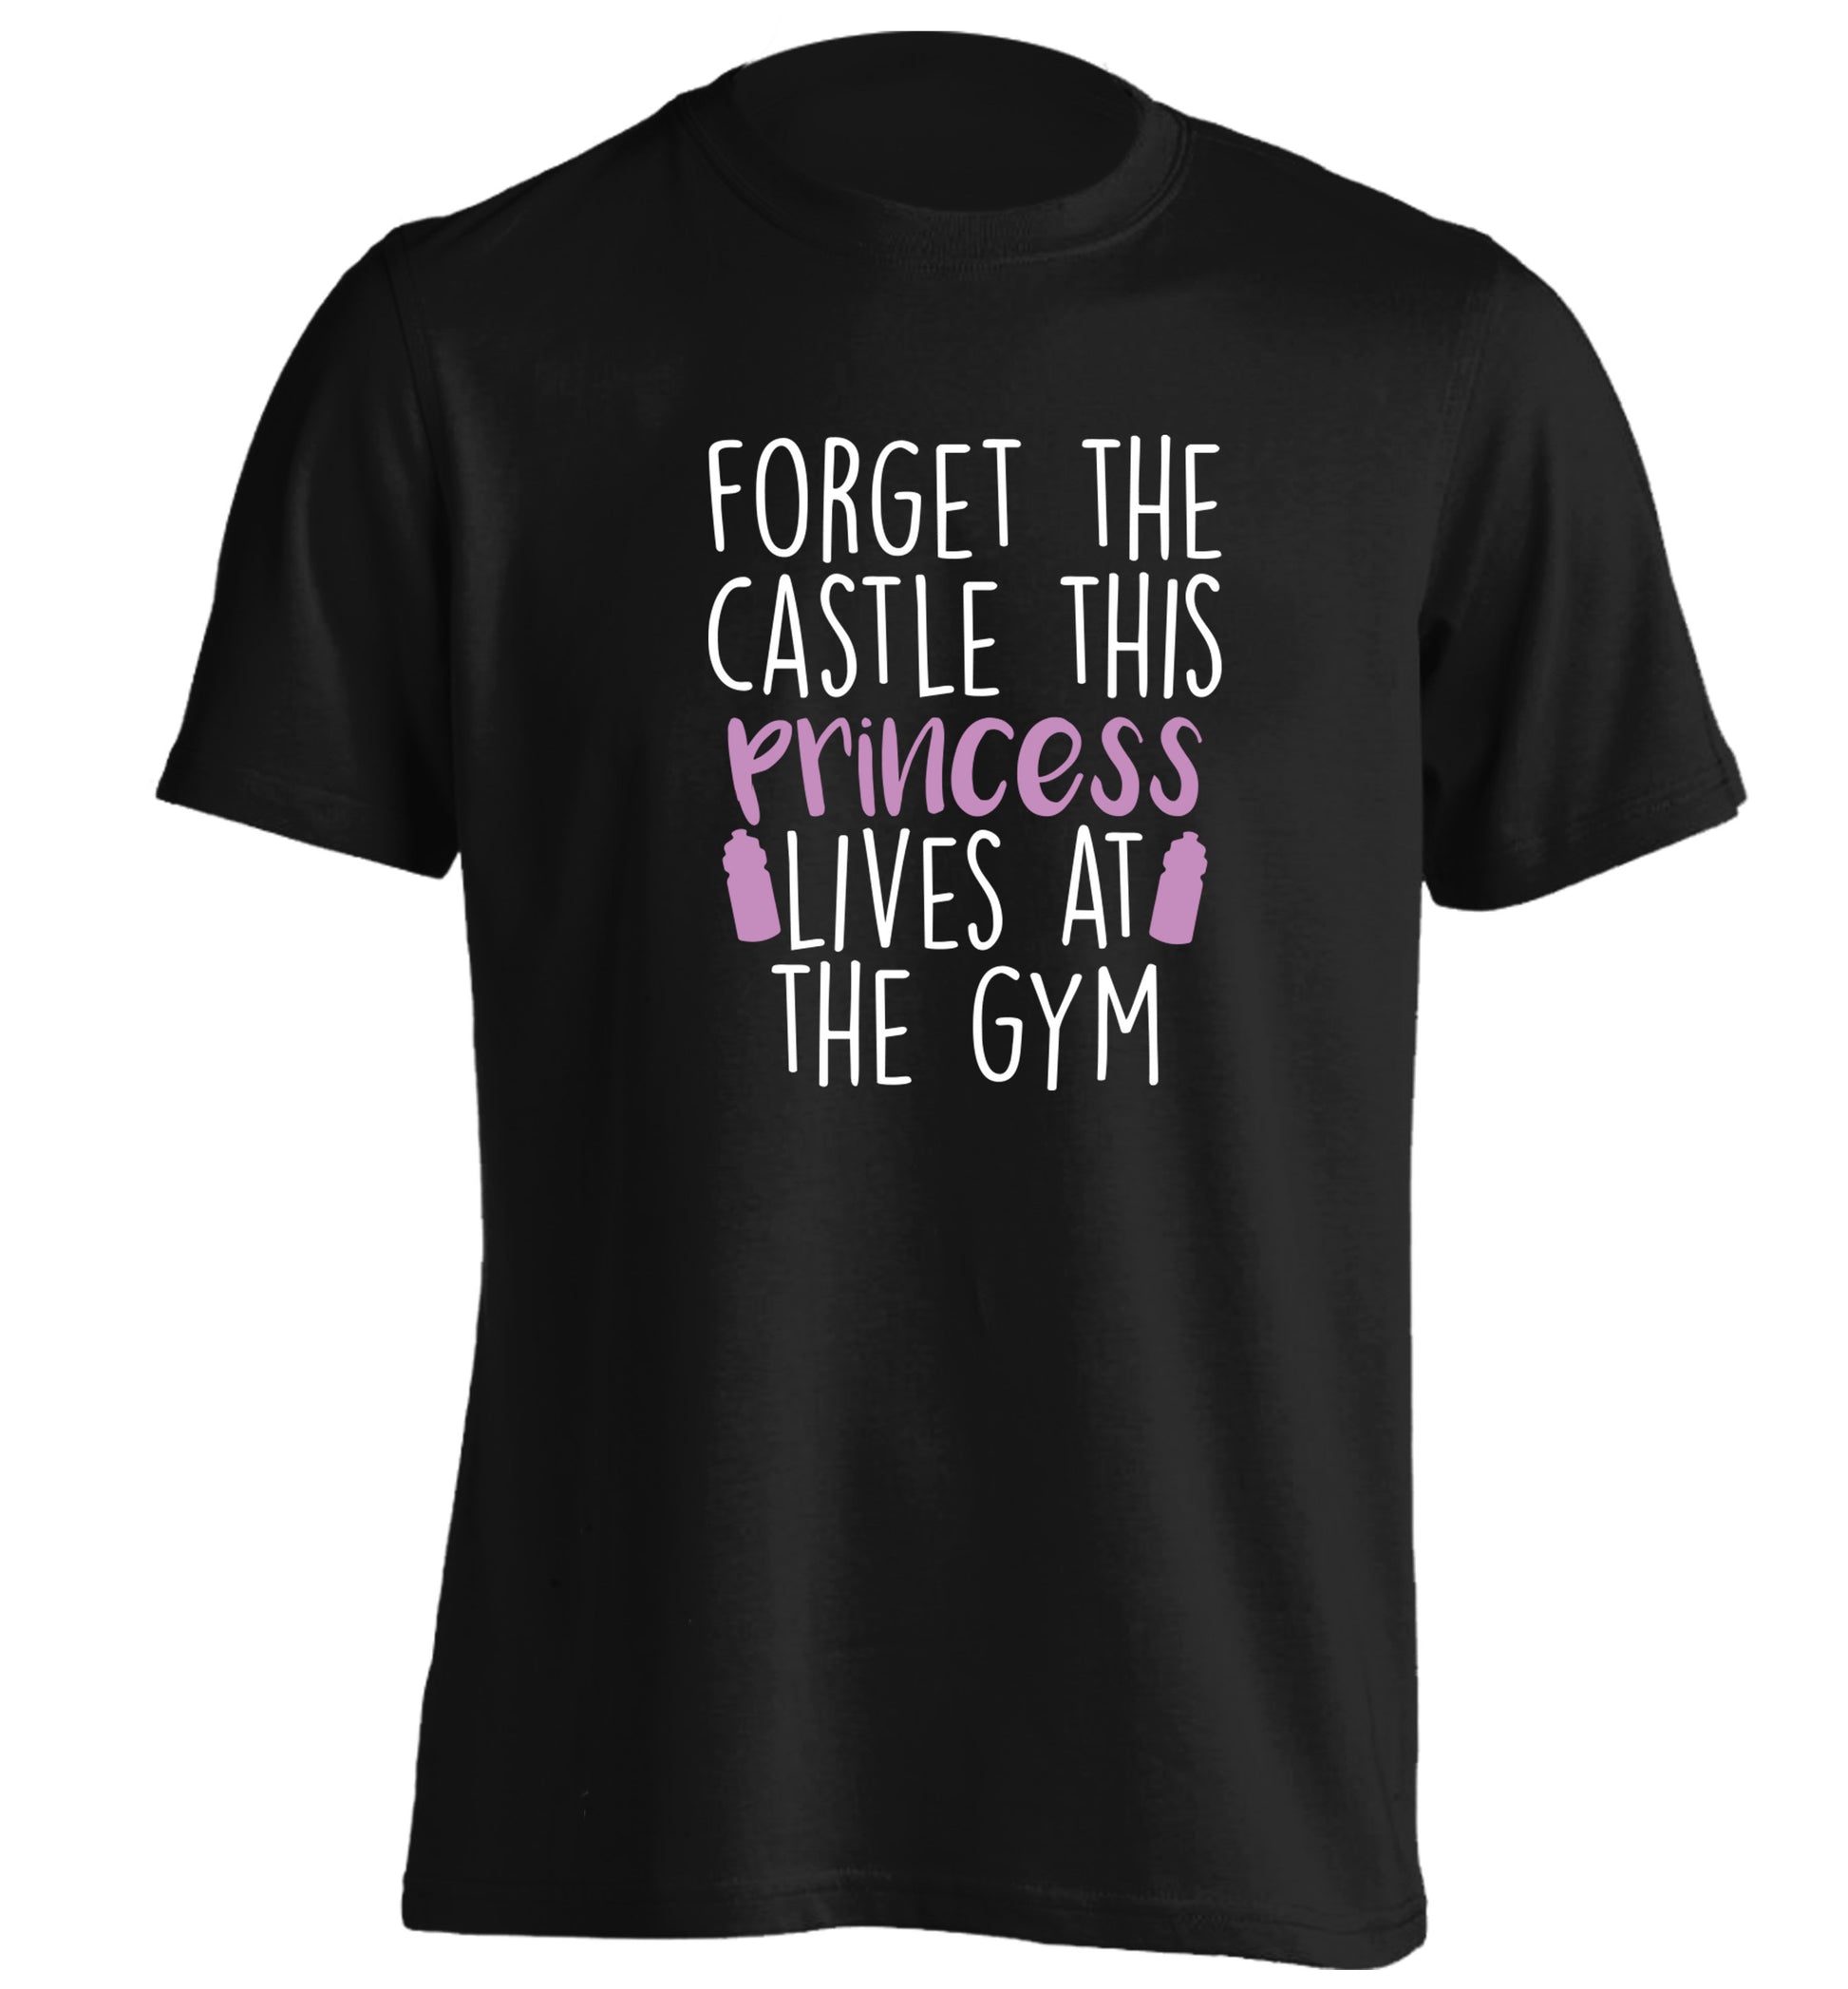 Forget the castle this princess lives at the gym adults unisex black Tshirt 2XL